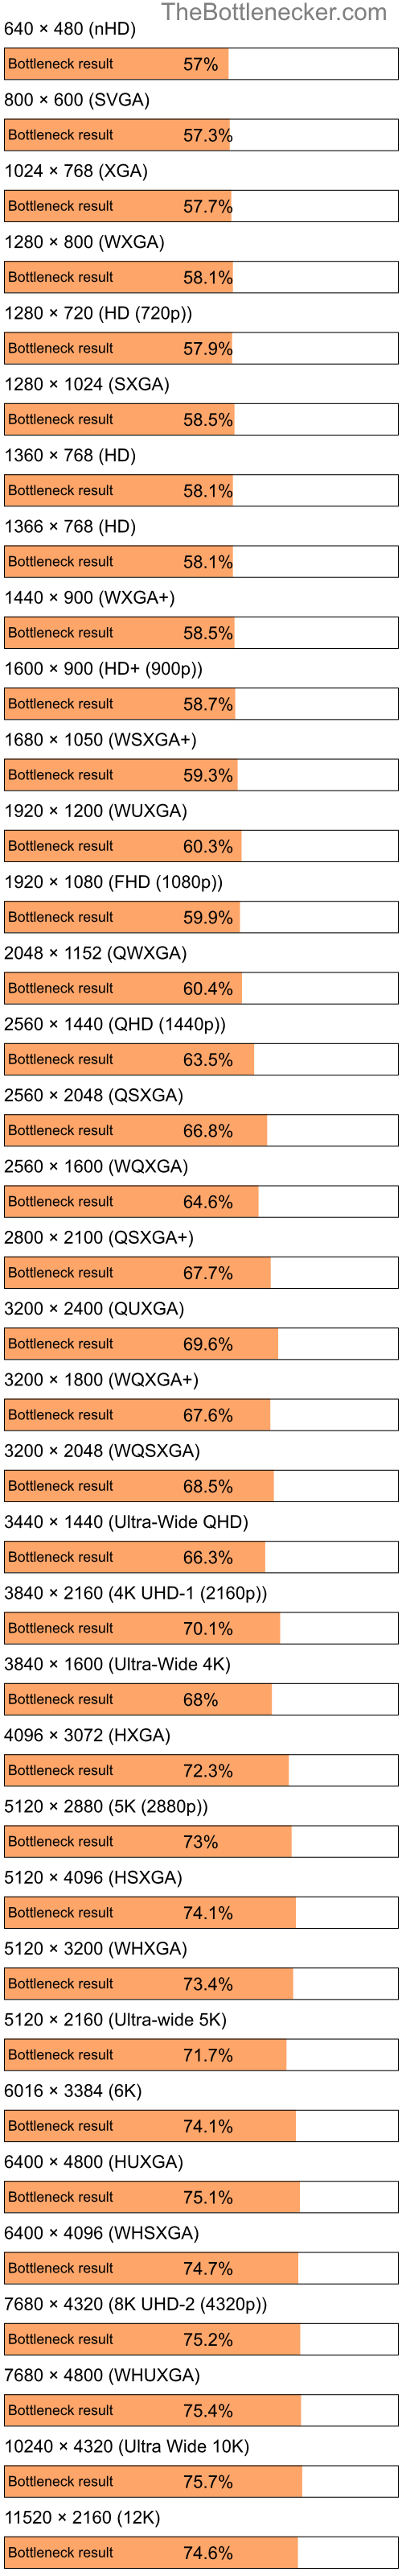 Bottleneck results by resolution for Intel Pentium 4 and AMD Mobility Radeon HD 2400 in Processor Intense Tasks